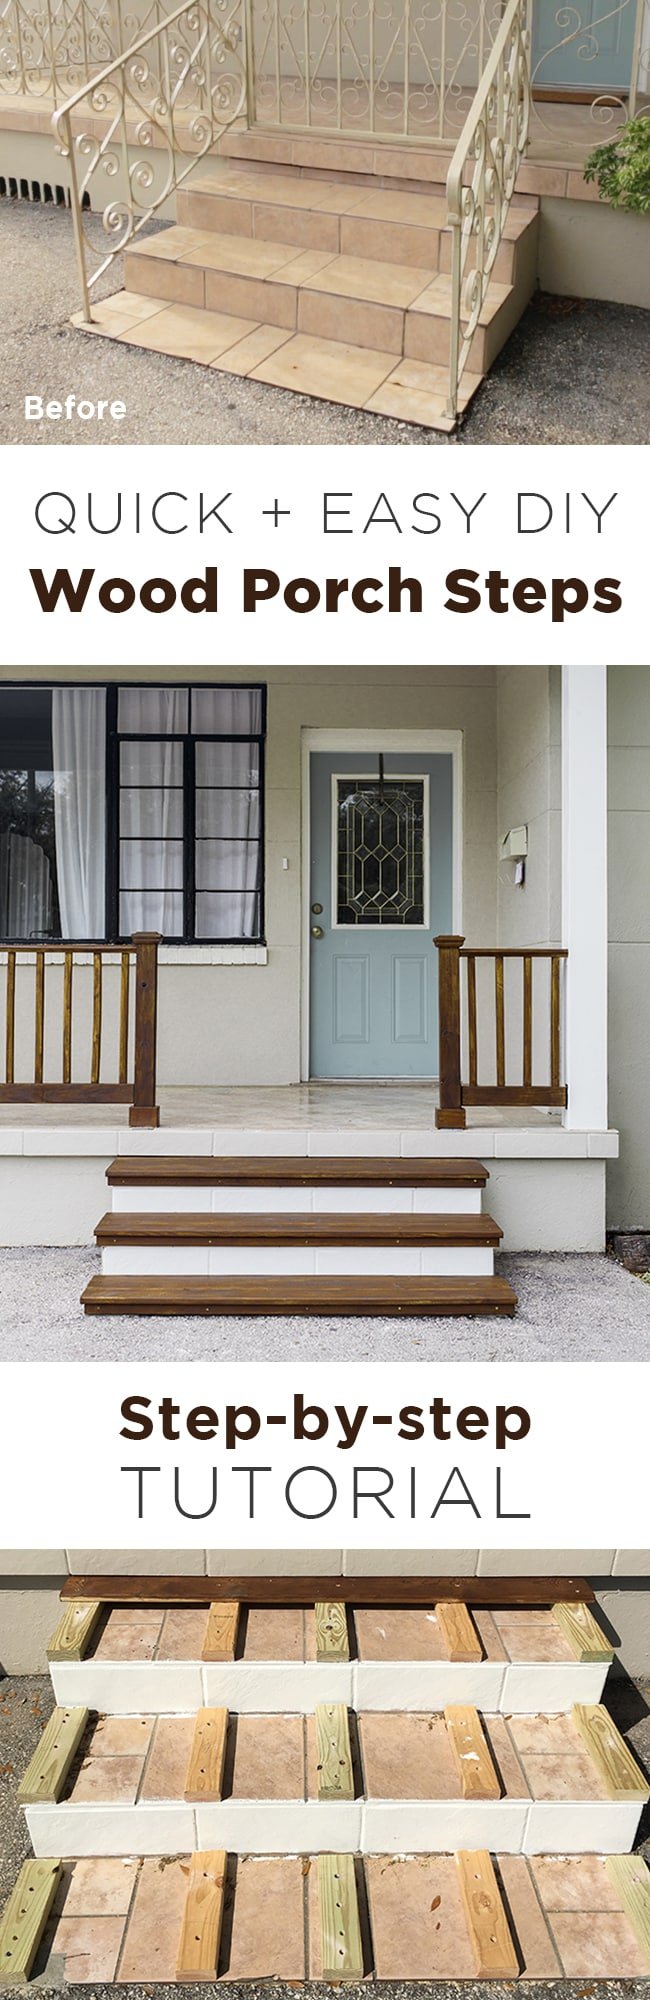 Simple Diy Wood Porch Steps Makeover, Building Wooden Steps For A Porch